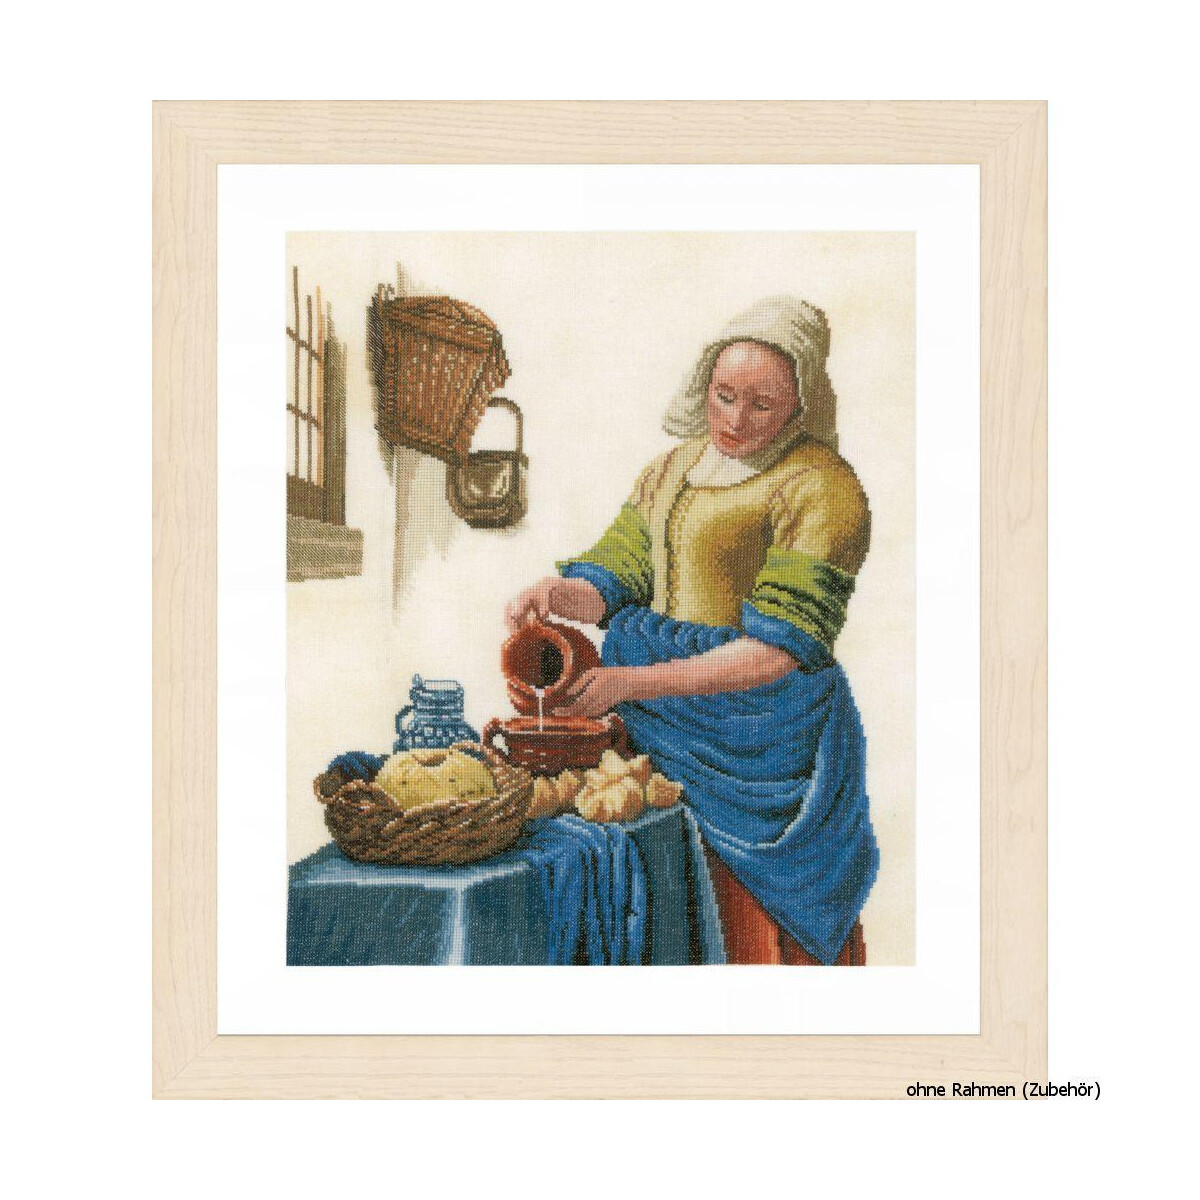 A Lanarte embroidery pack shows a woman pouring liquid...